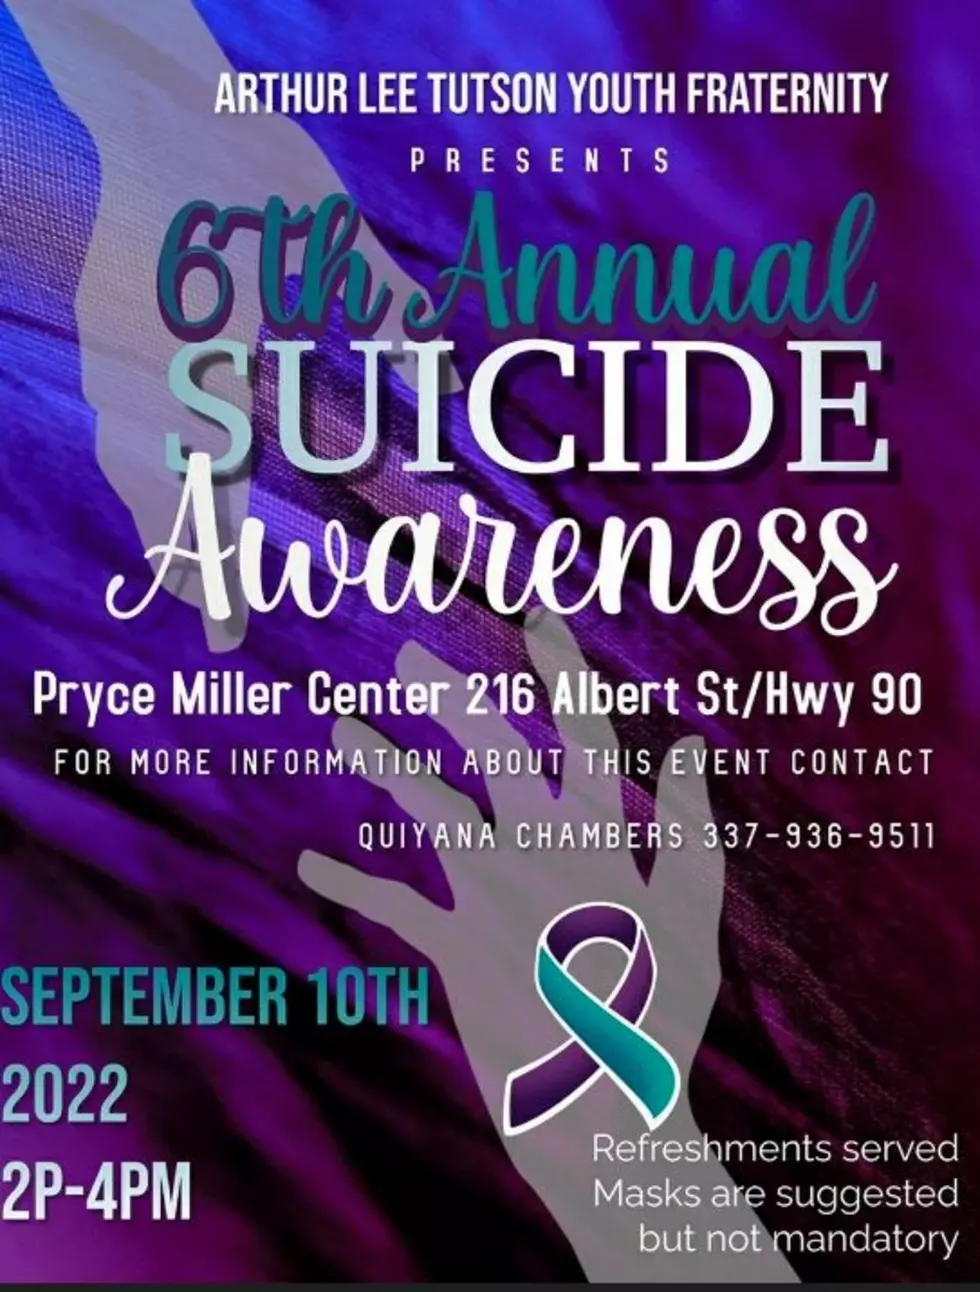 Lake Charles Youth Group Hosting Annual Suicide Prevention Program